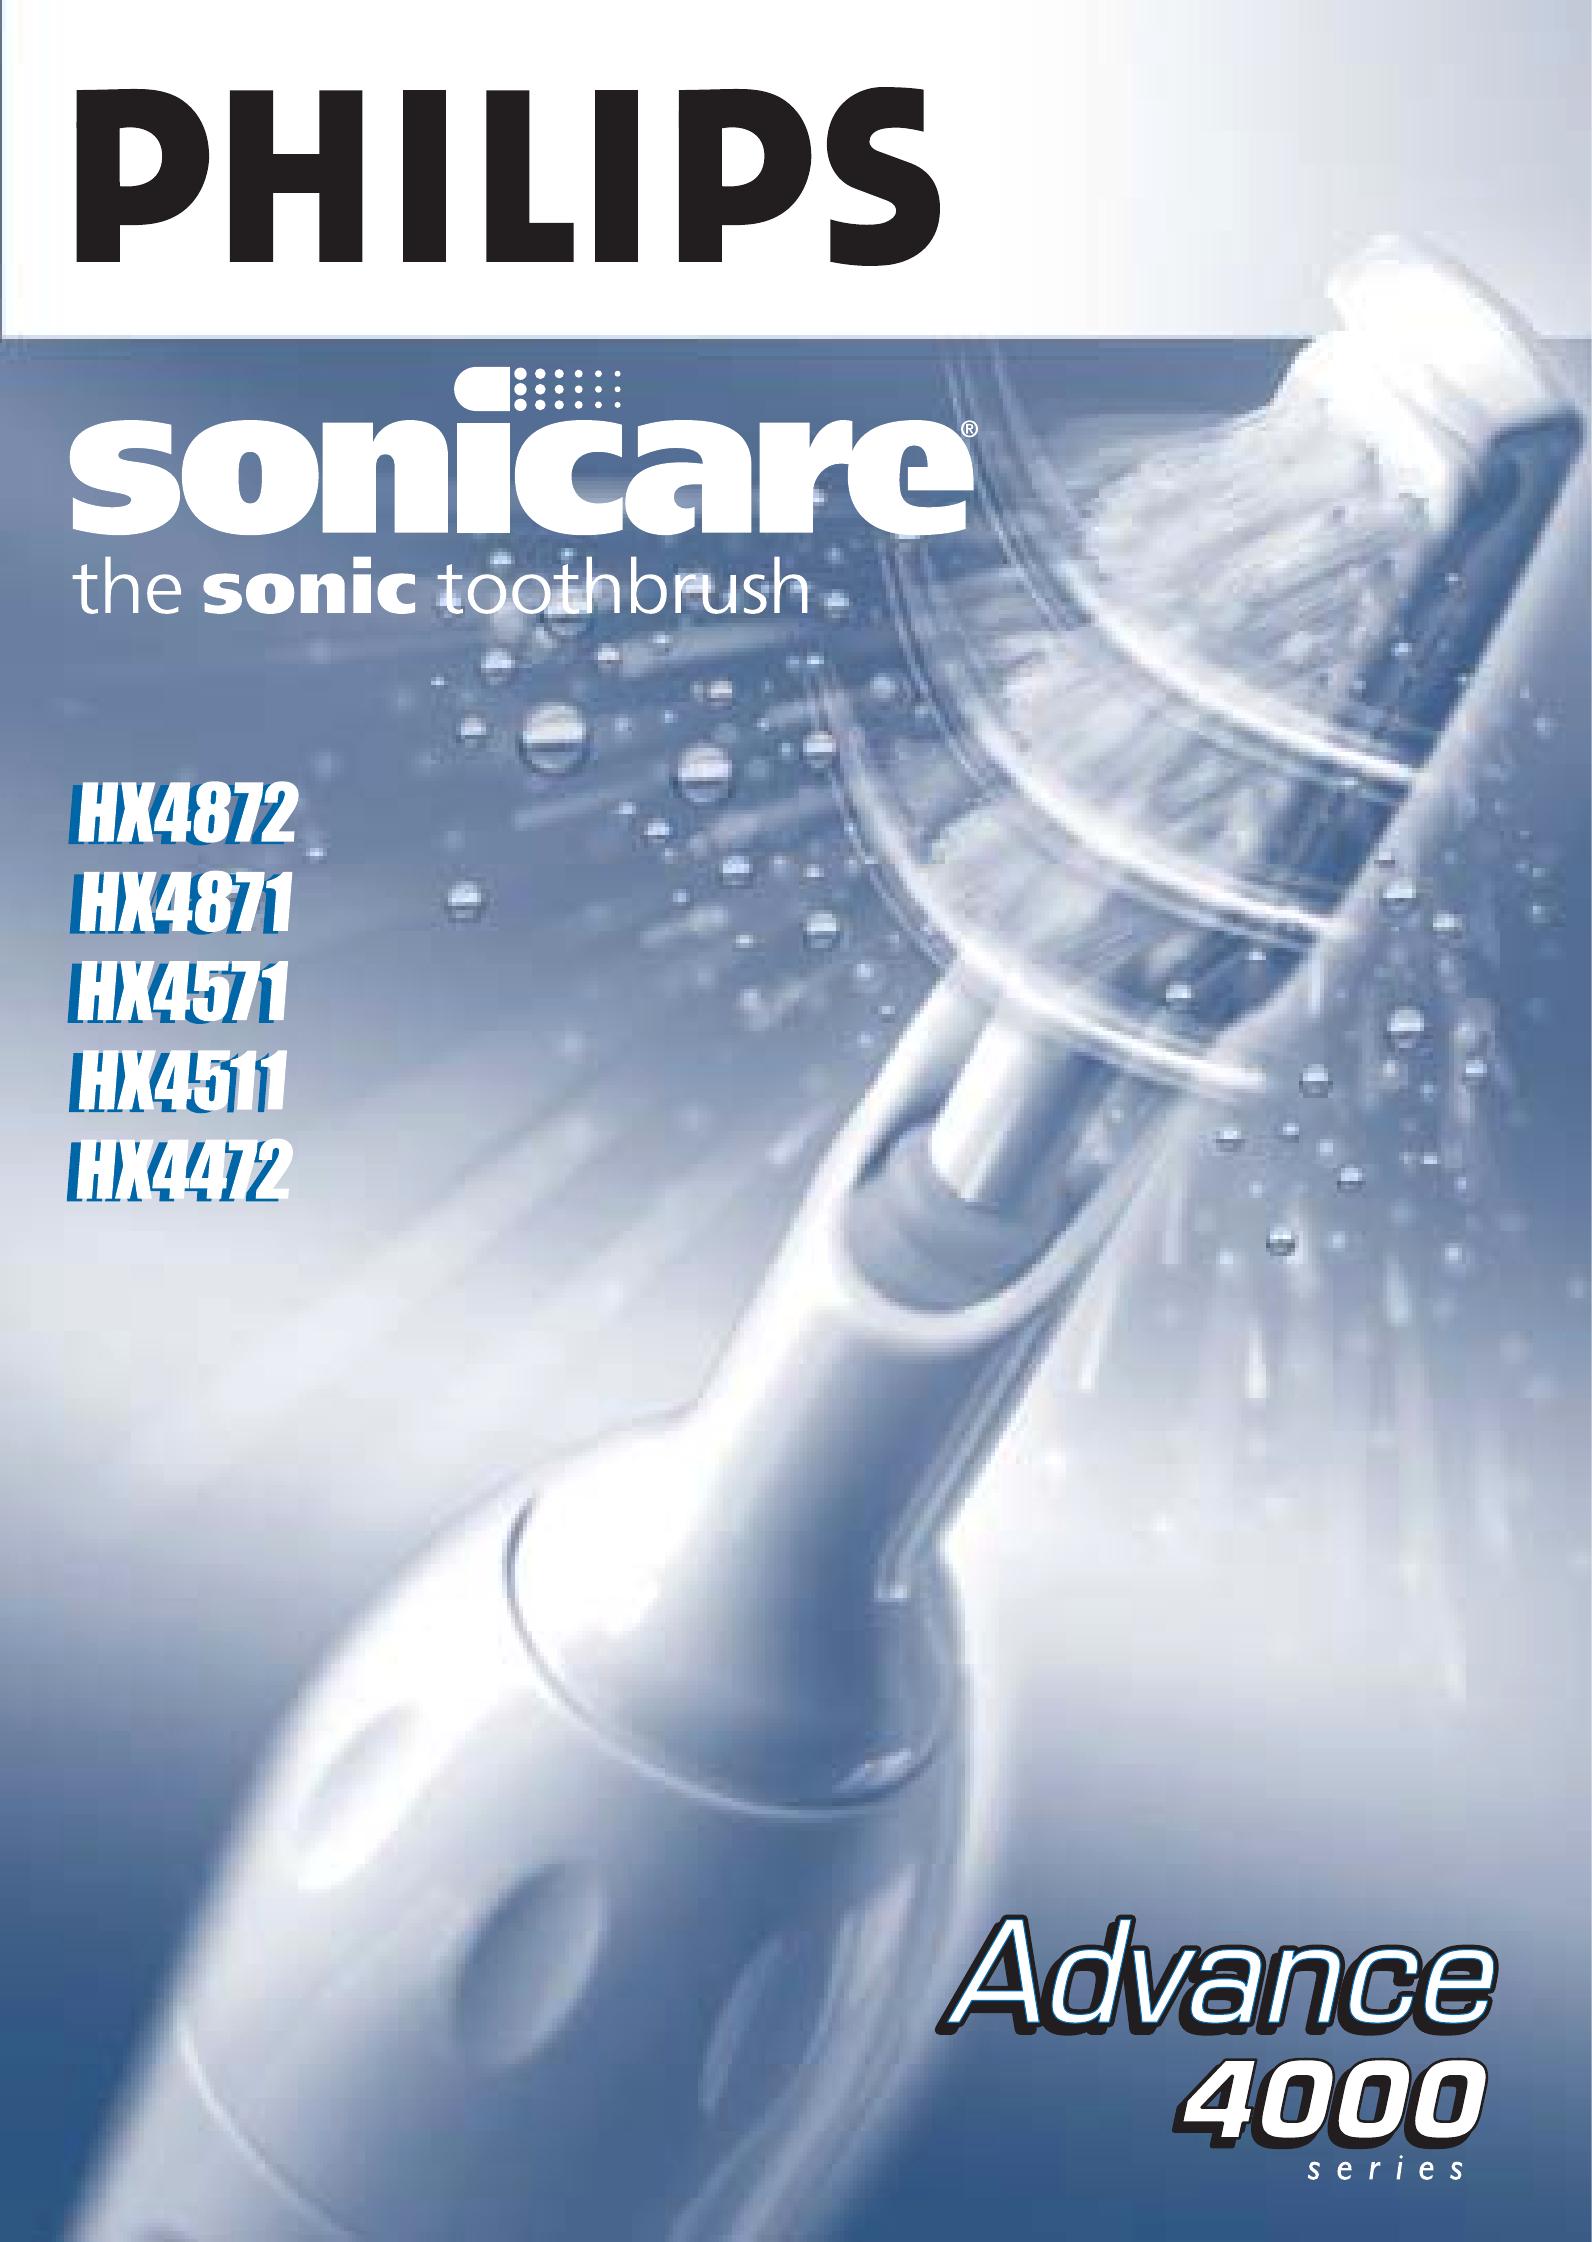 Sonicare HX4511 Electric Toothbrush User Manual